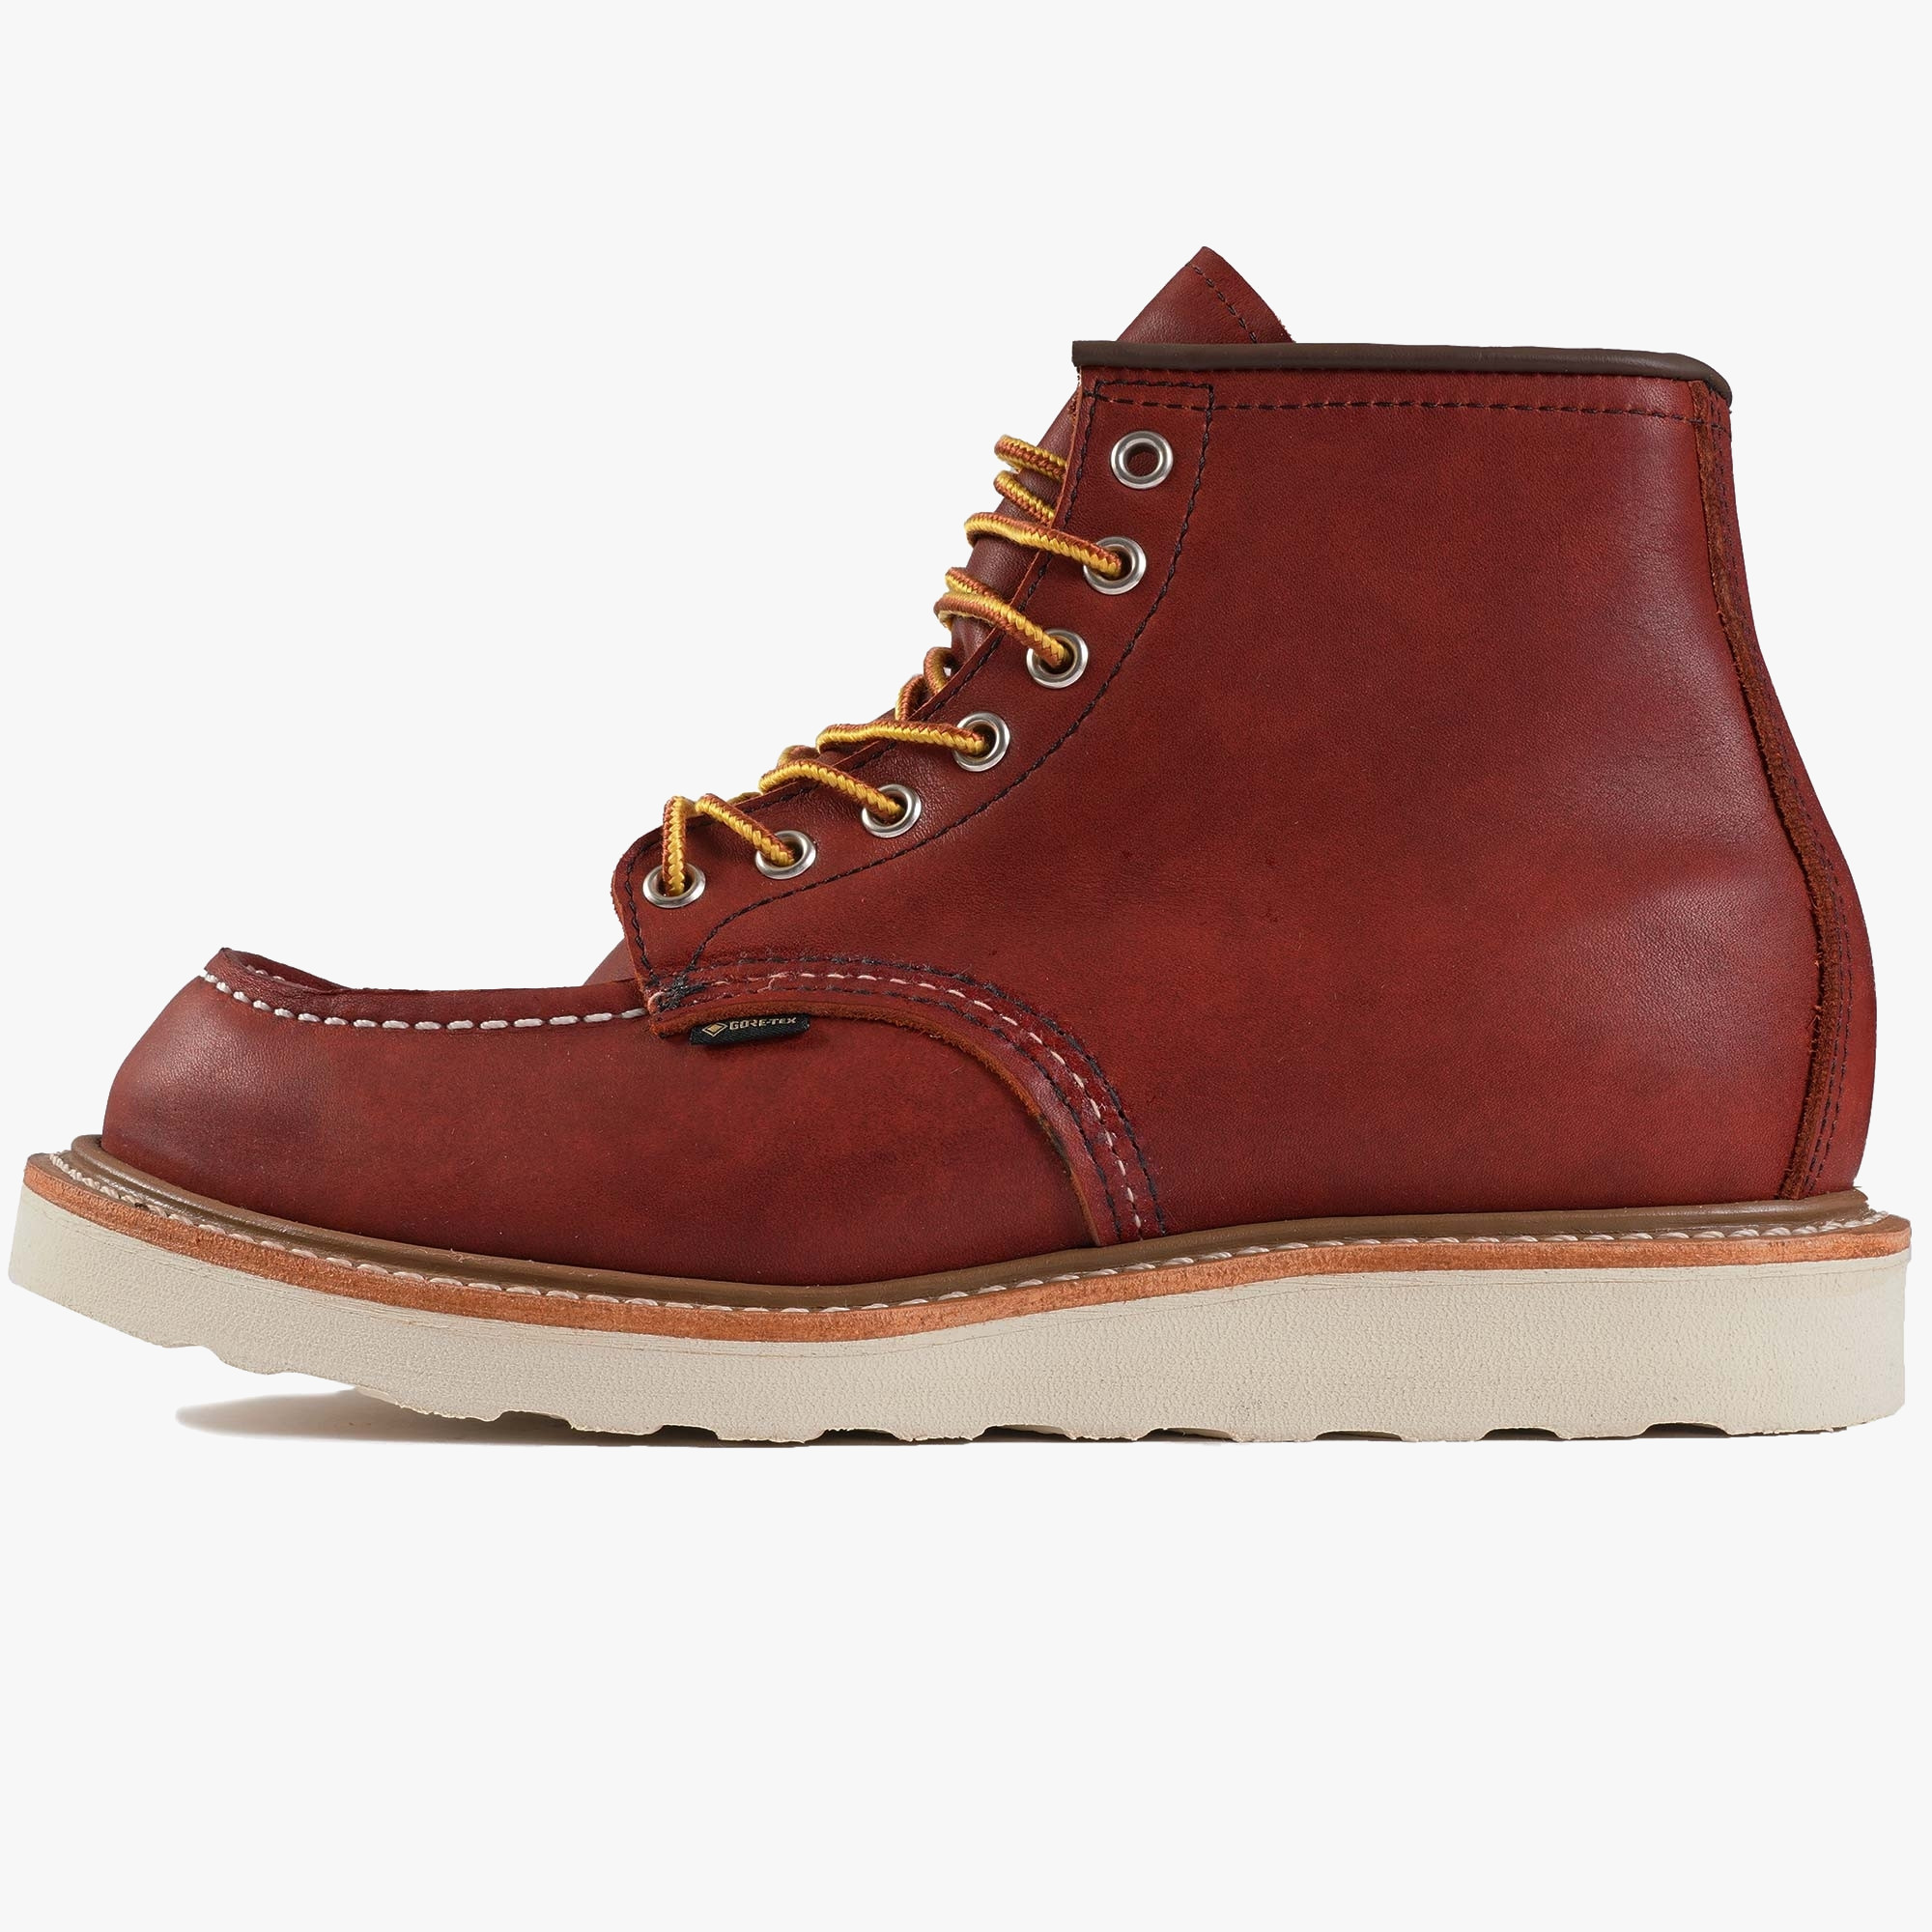 RED WING GORE-TEX MOC TOE BOOTS ORO